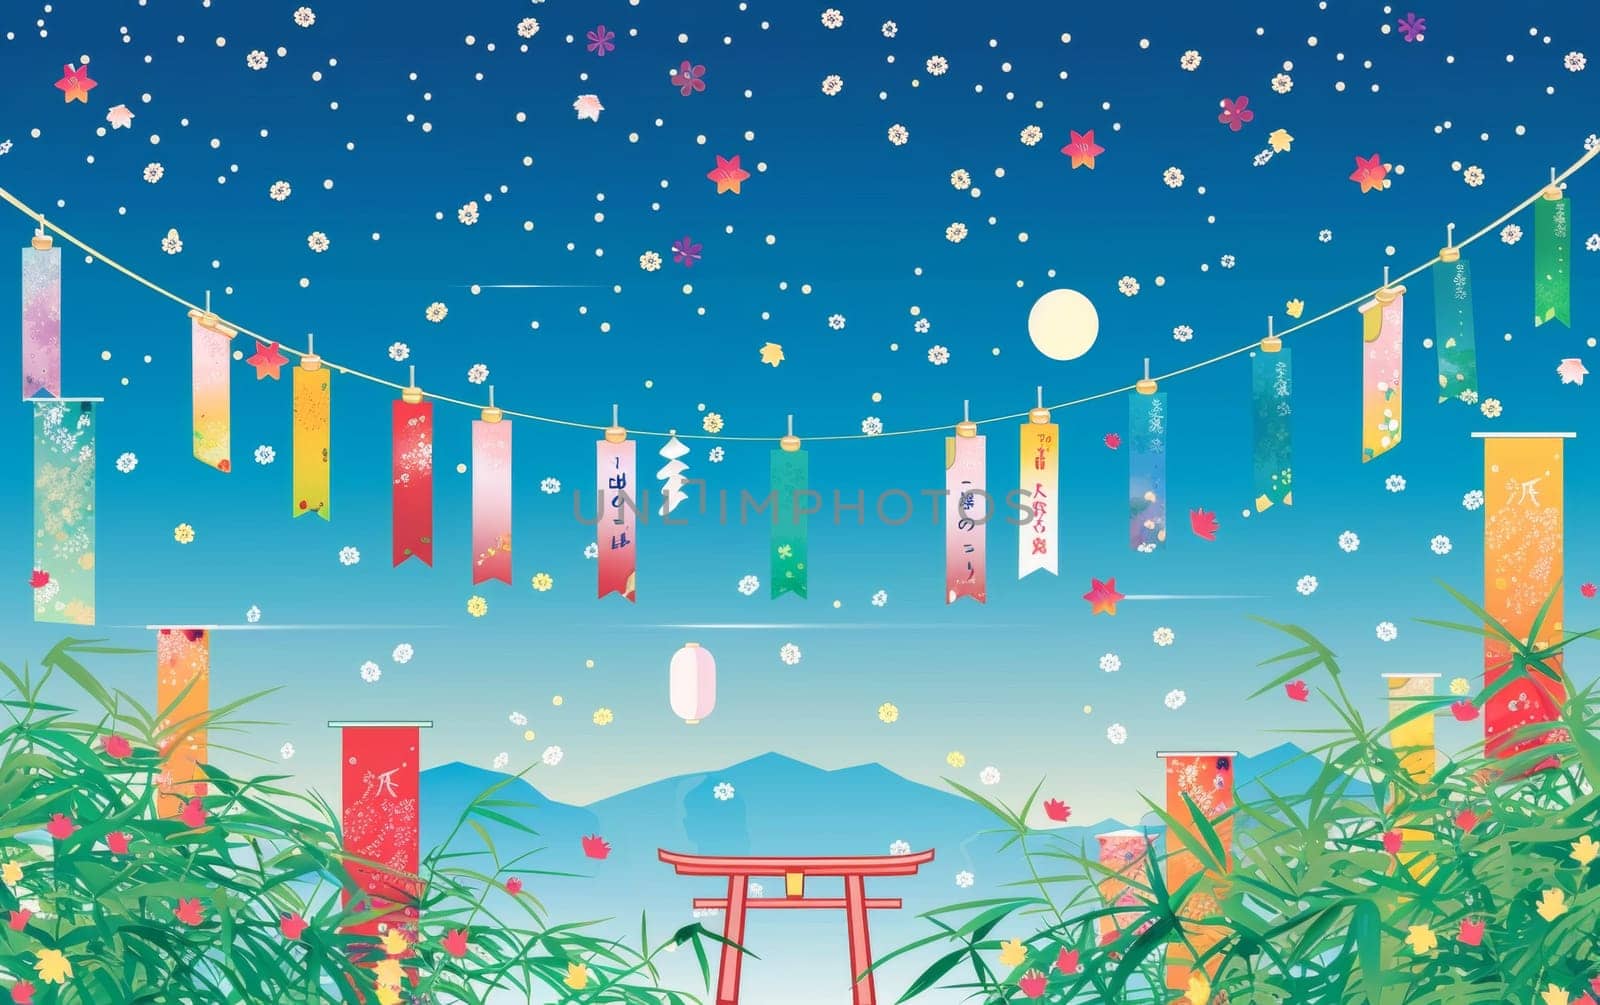 Vibrant Tanabata festival illustration with colorful streamers, Japanese text, and fireworks on a blue sky background